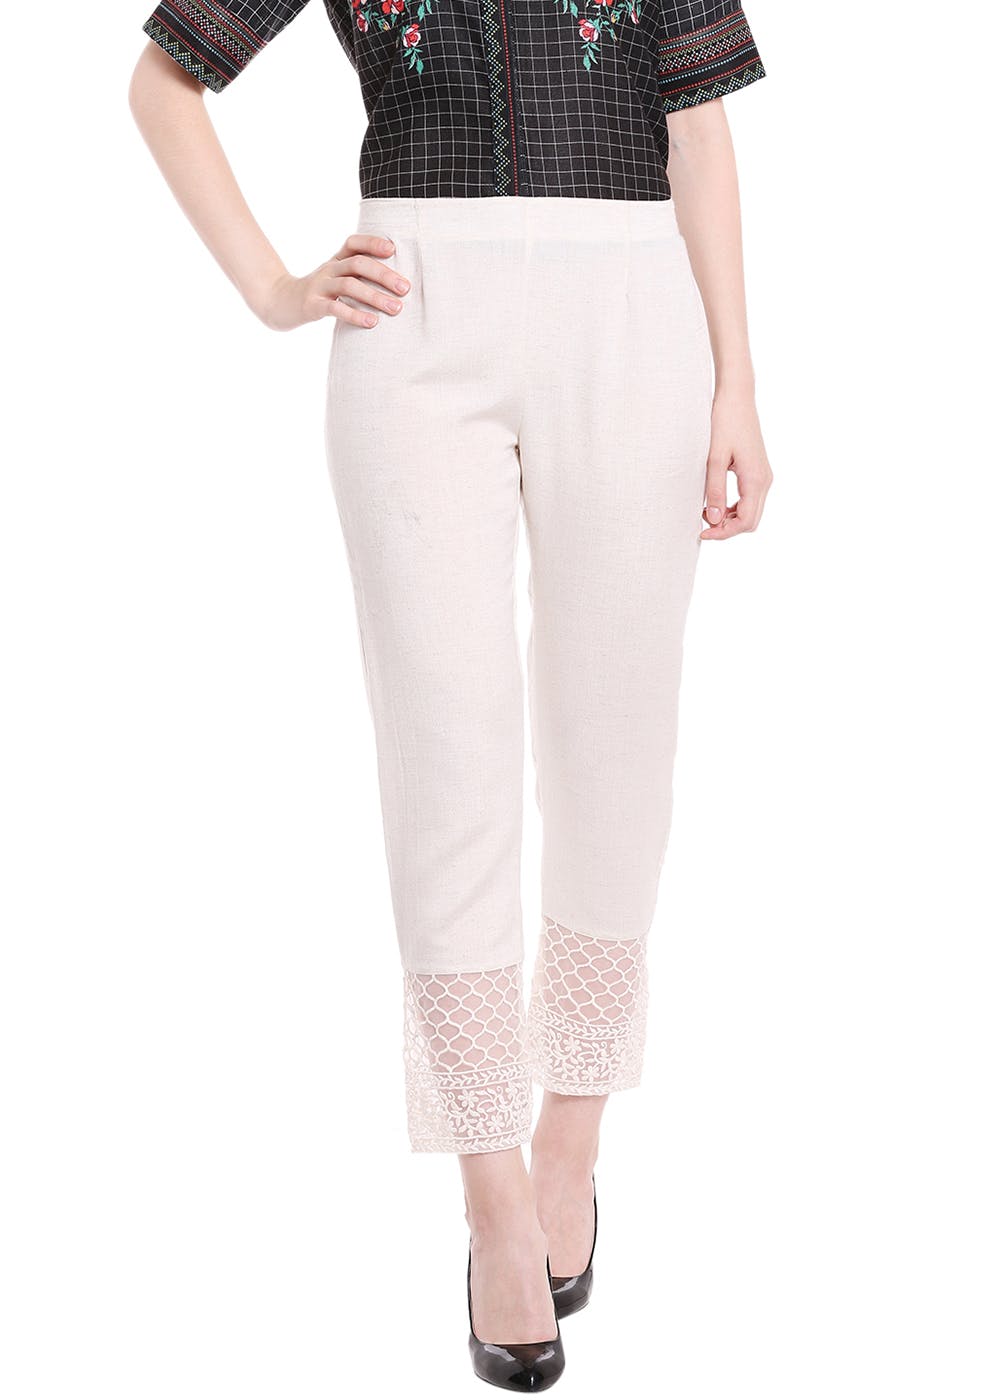 pants with lace work for women  girls peach Trousers  Pants